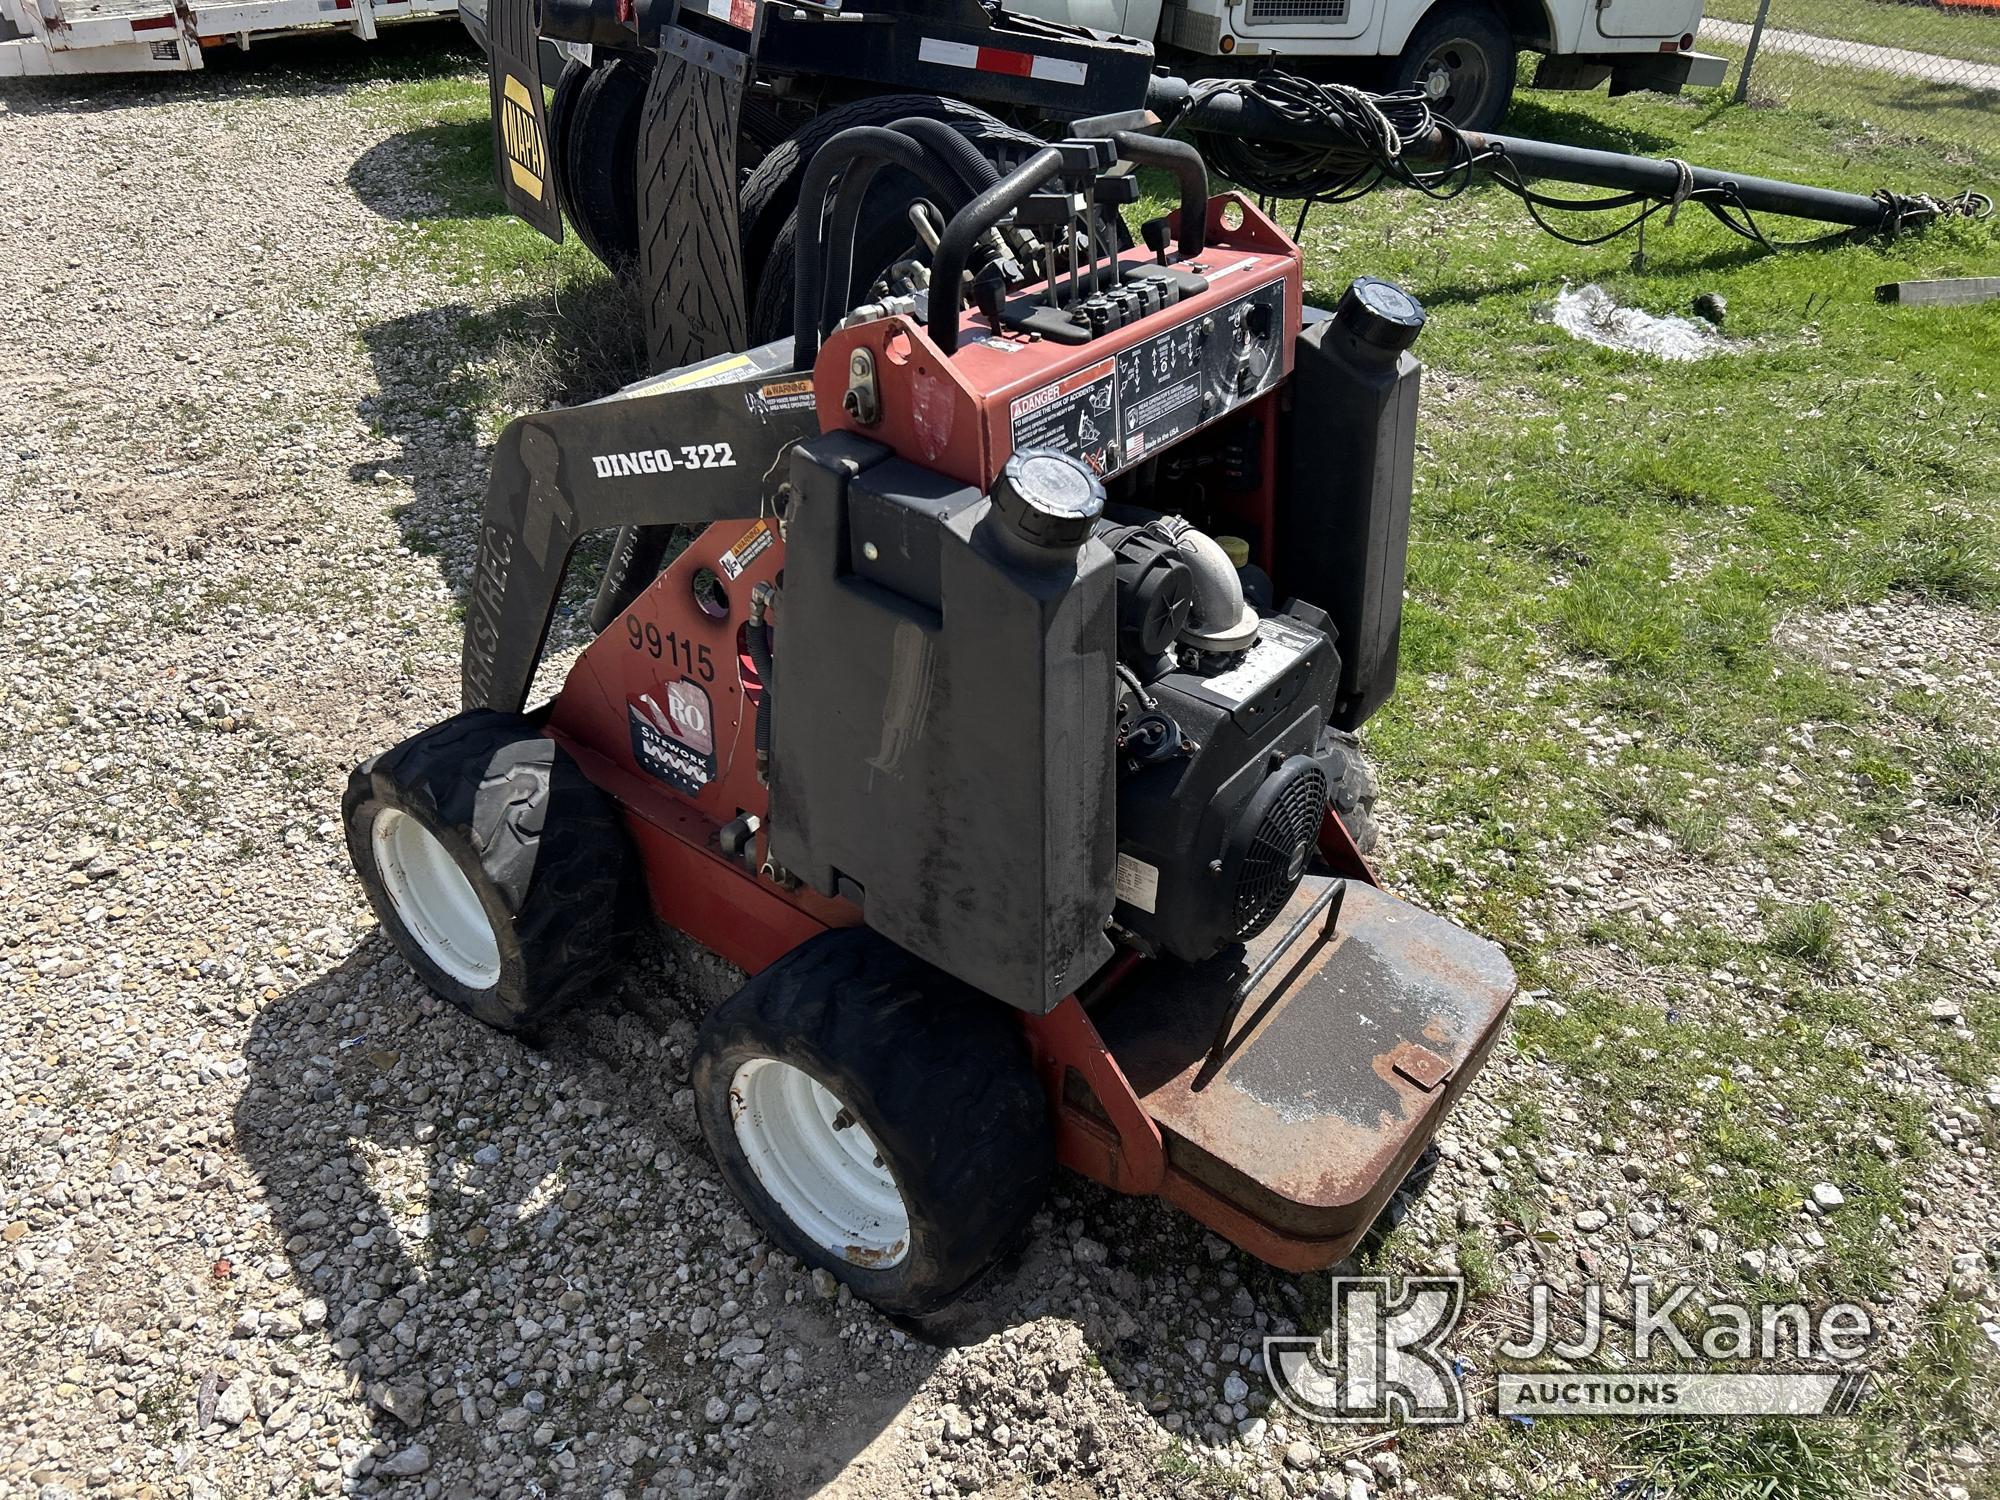 (Waxahachie, TX) 1999 Toro Dingo 322 Stand Behind Rubber Tired Skid Steer Loader, City of Plano Owne